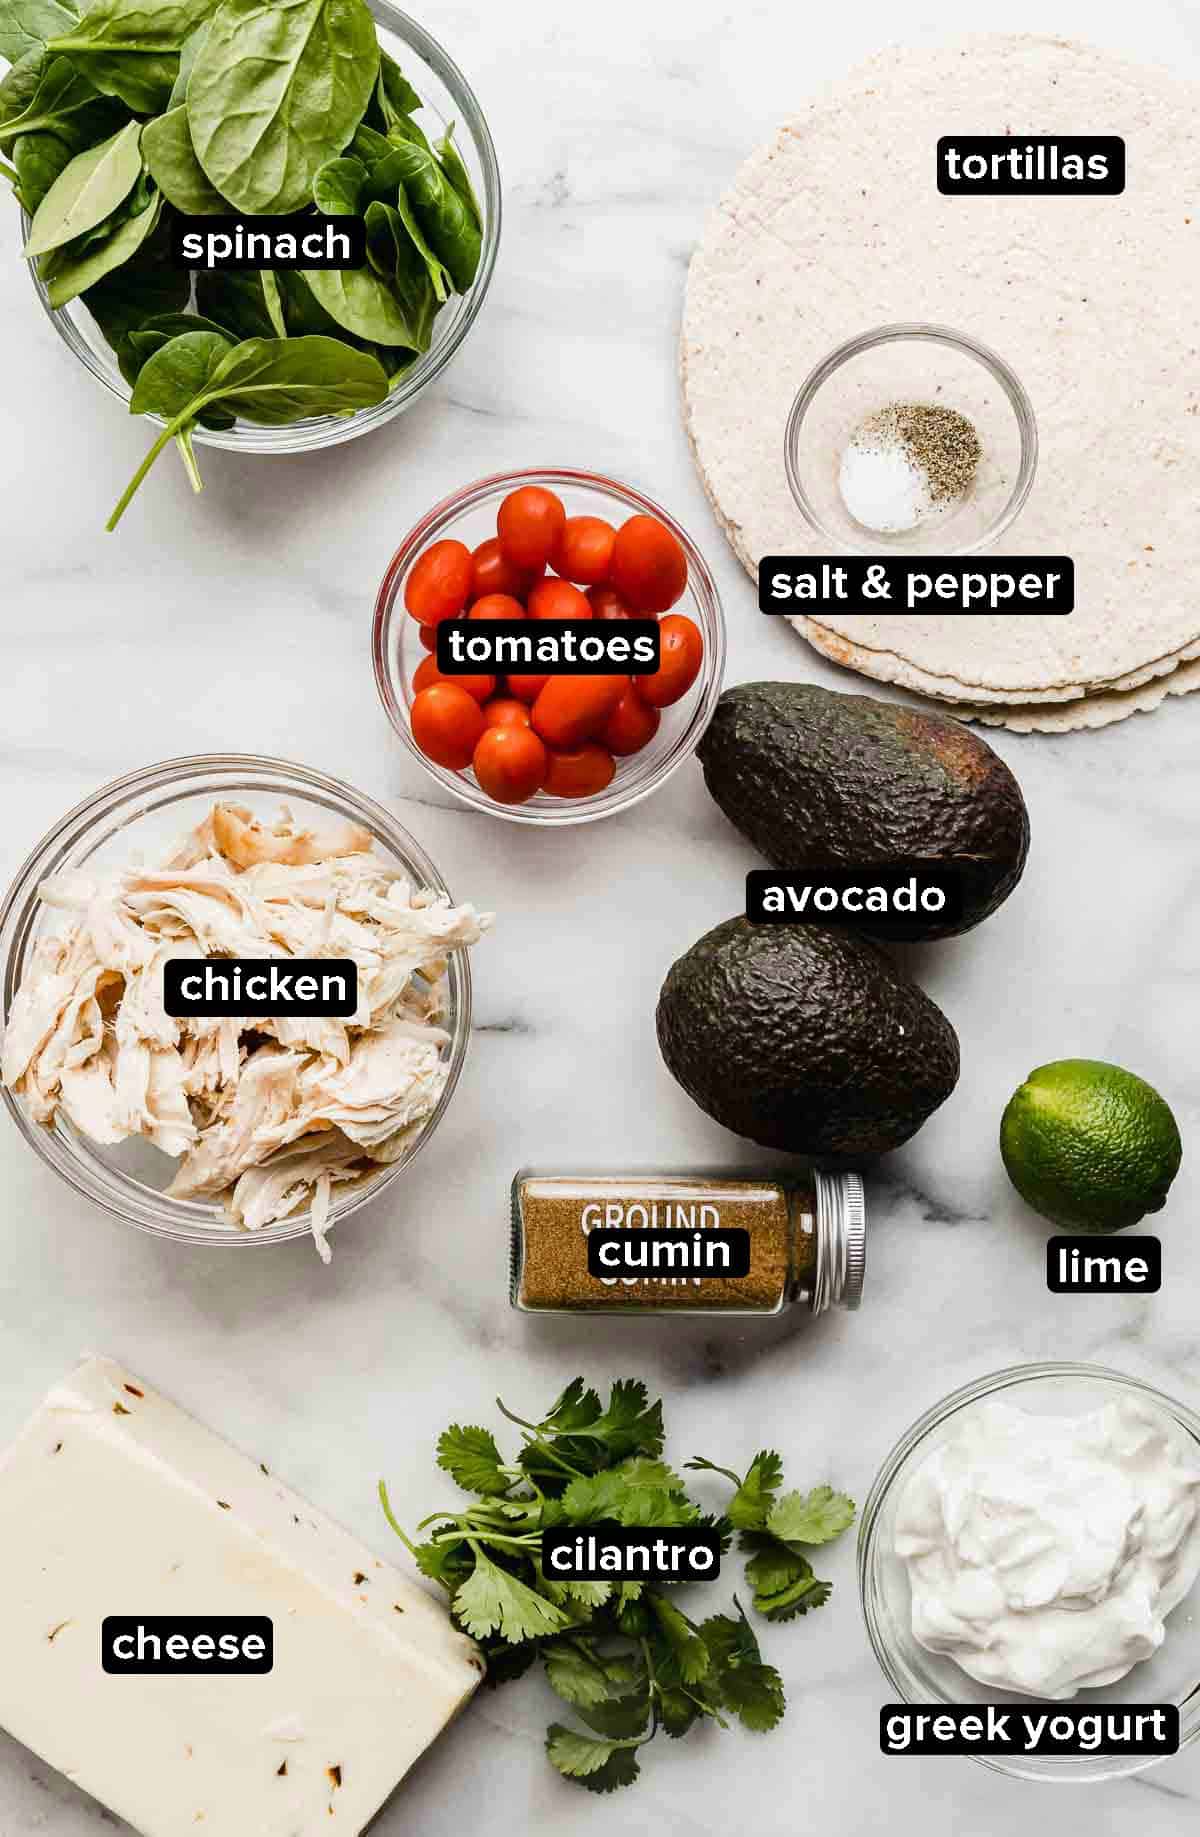 Healthy Chicken Wraps ingredients portioned into glass bowls on a white background: tortillas, spinach, tomatoes, chicken, avocado, lime, cheese, greek yogurt.